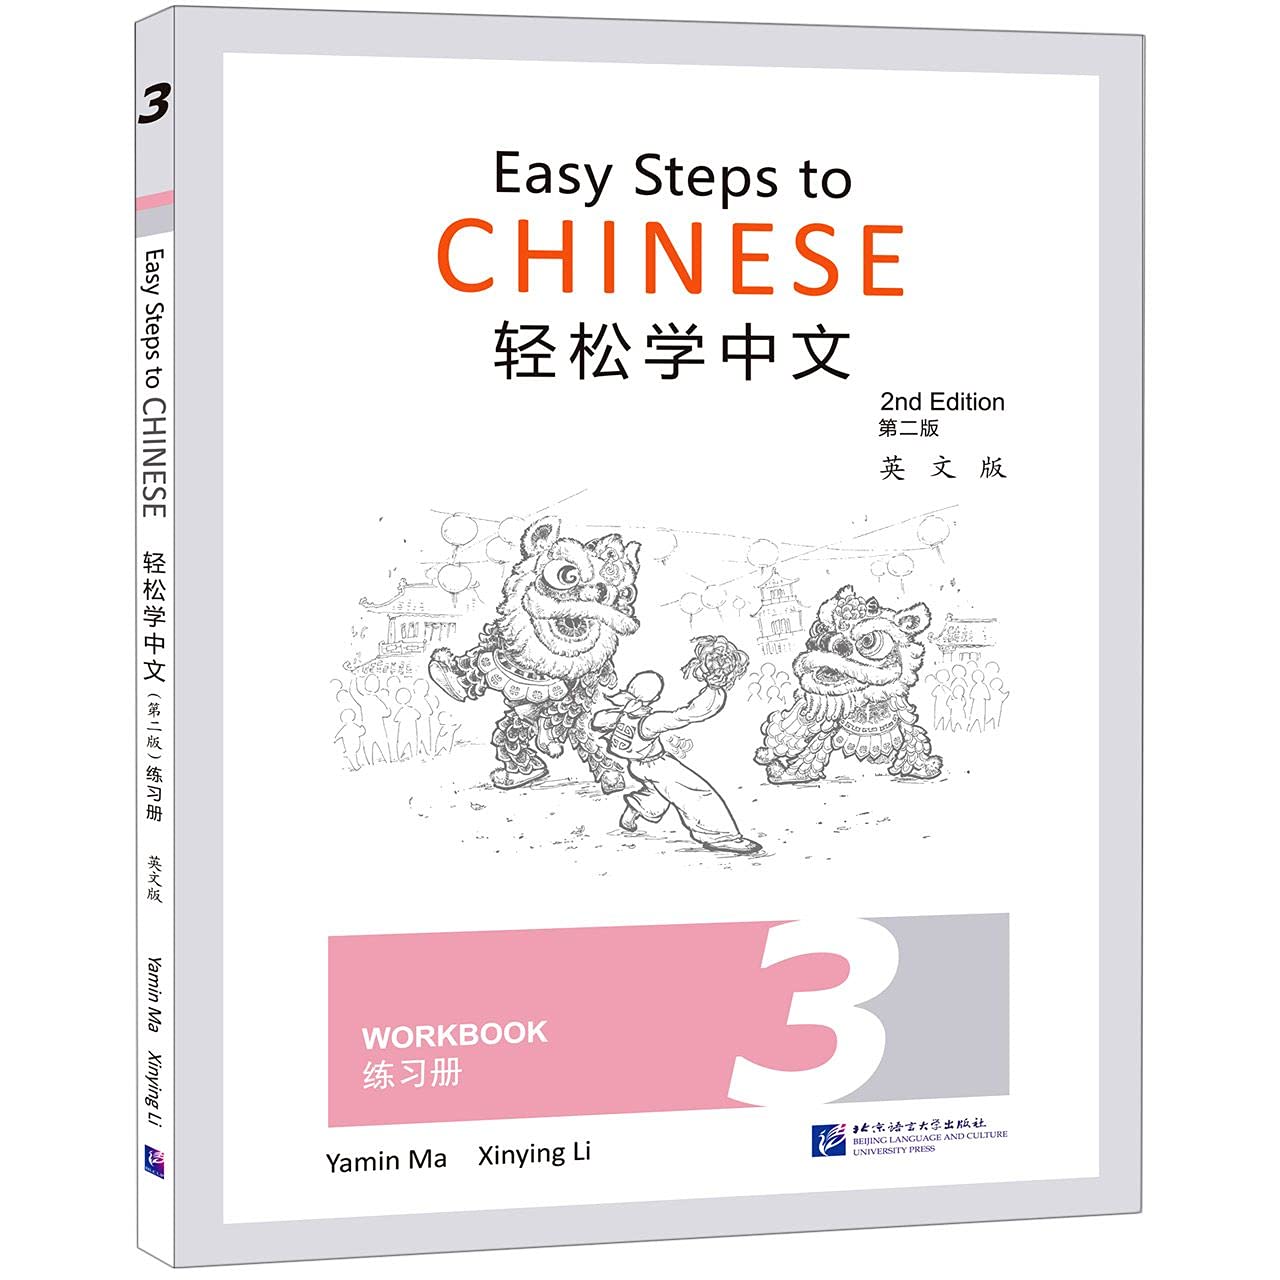 Easy Steps to Chinese Workbook 3 (2nd Edition)